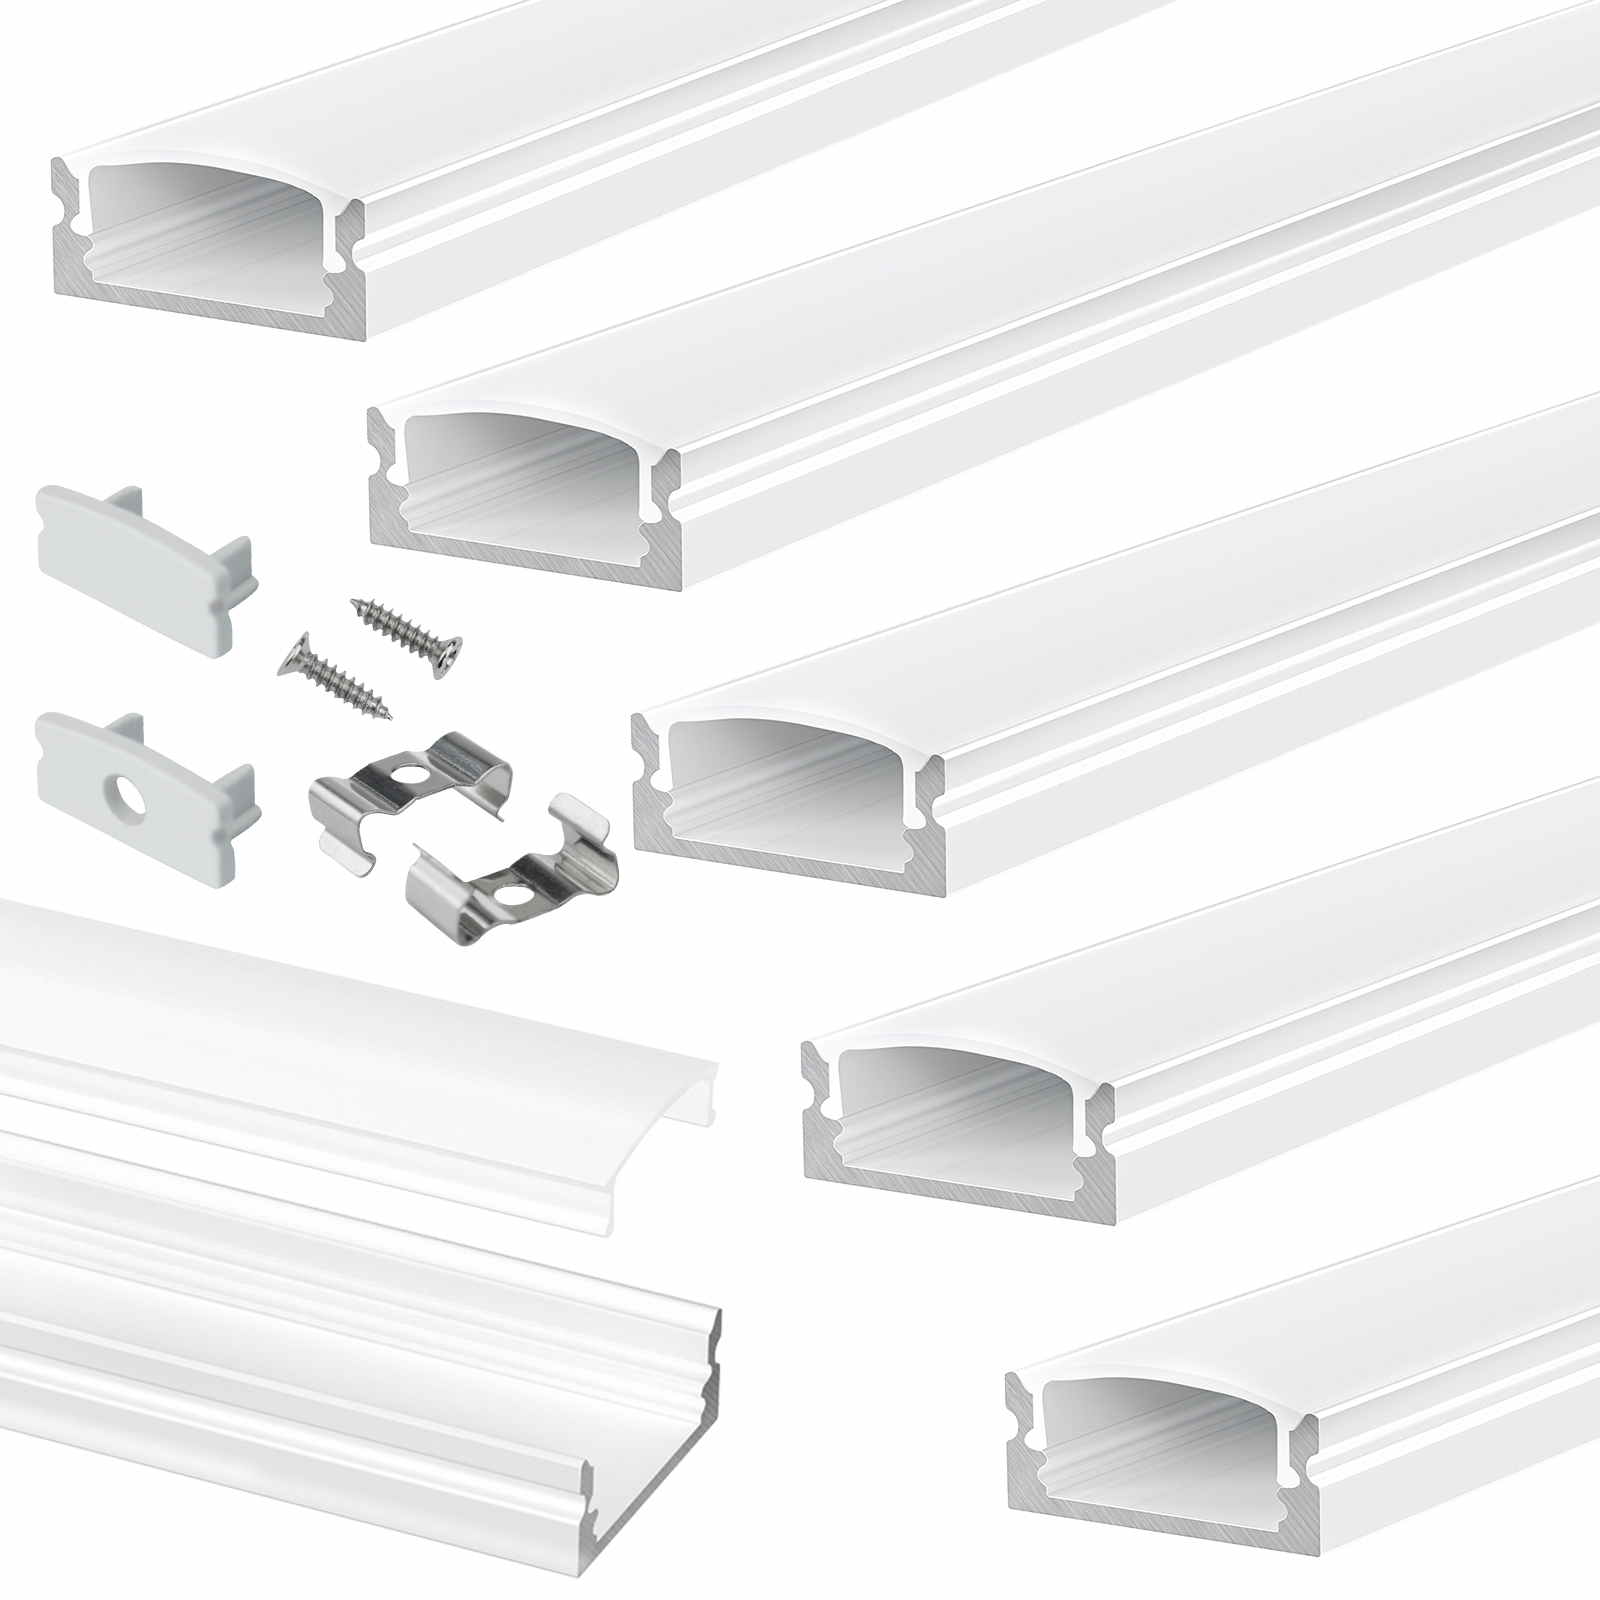 White LED Aluminum Channel System with Milky White Cover | Muzata USA